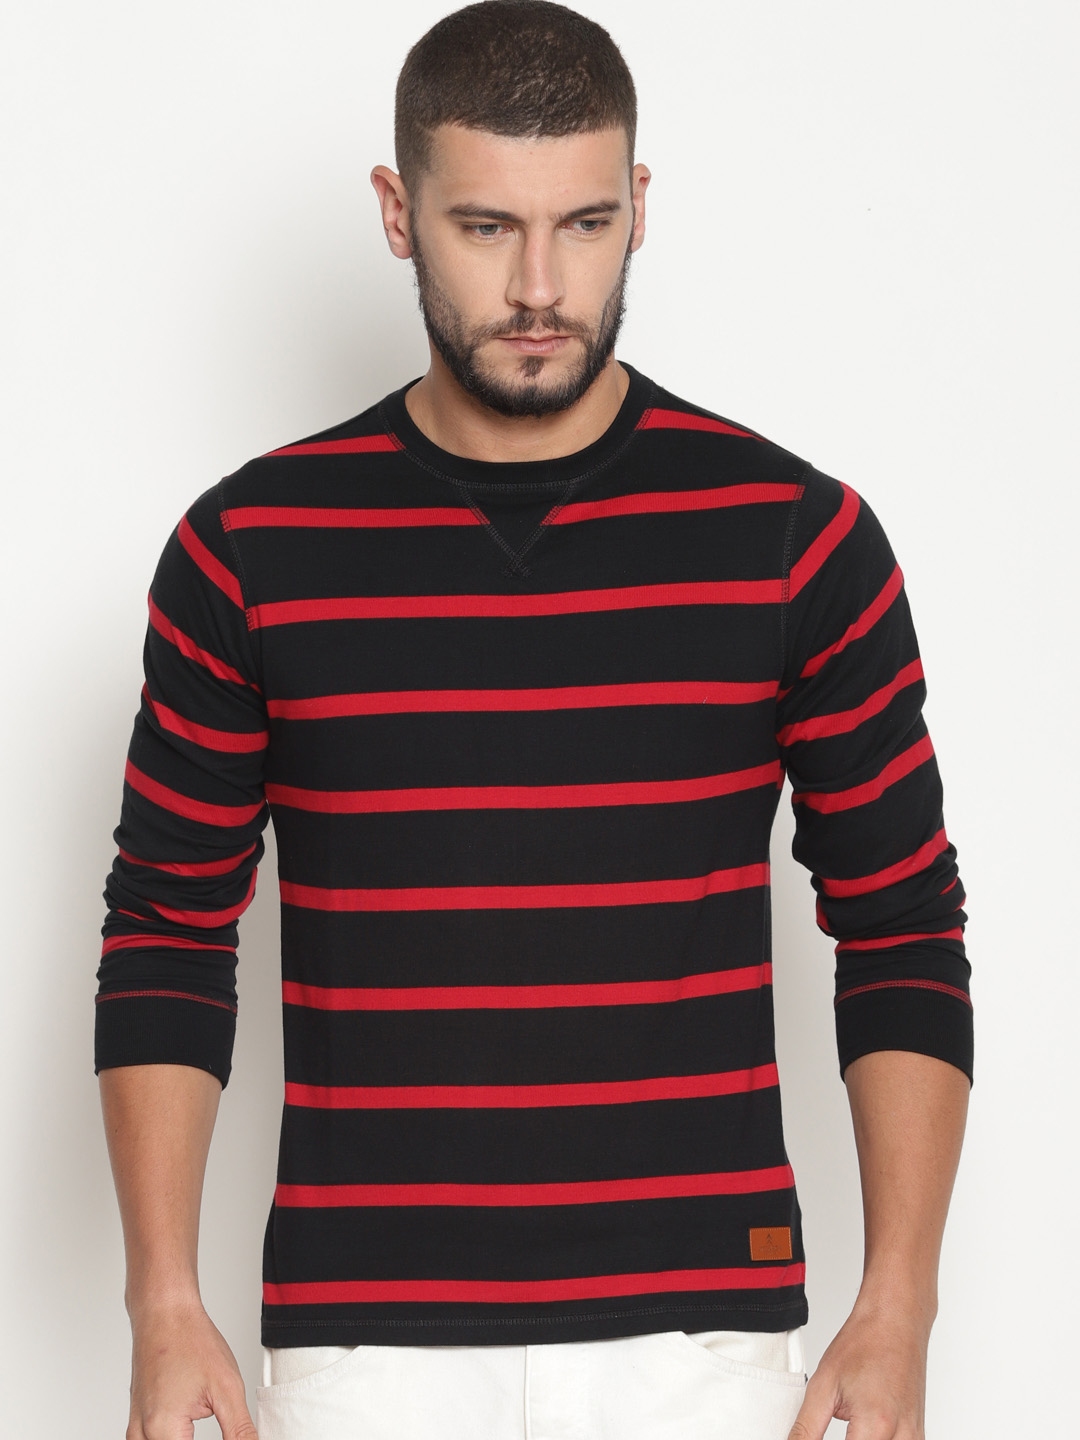 red and black striped t shirt mens